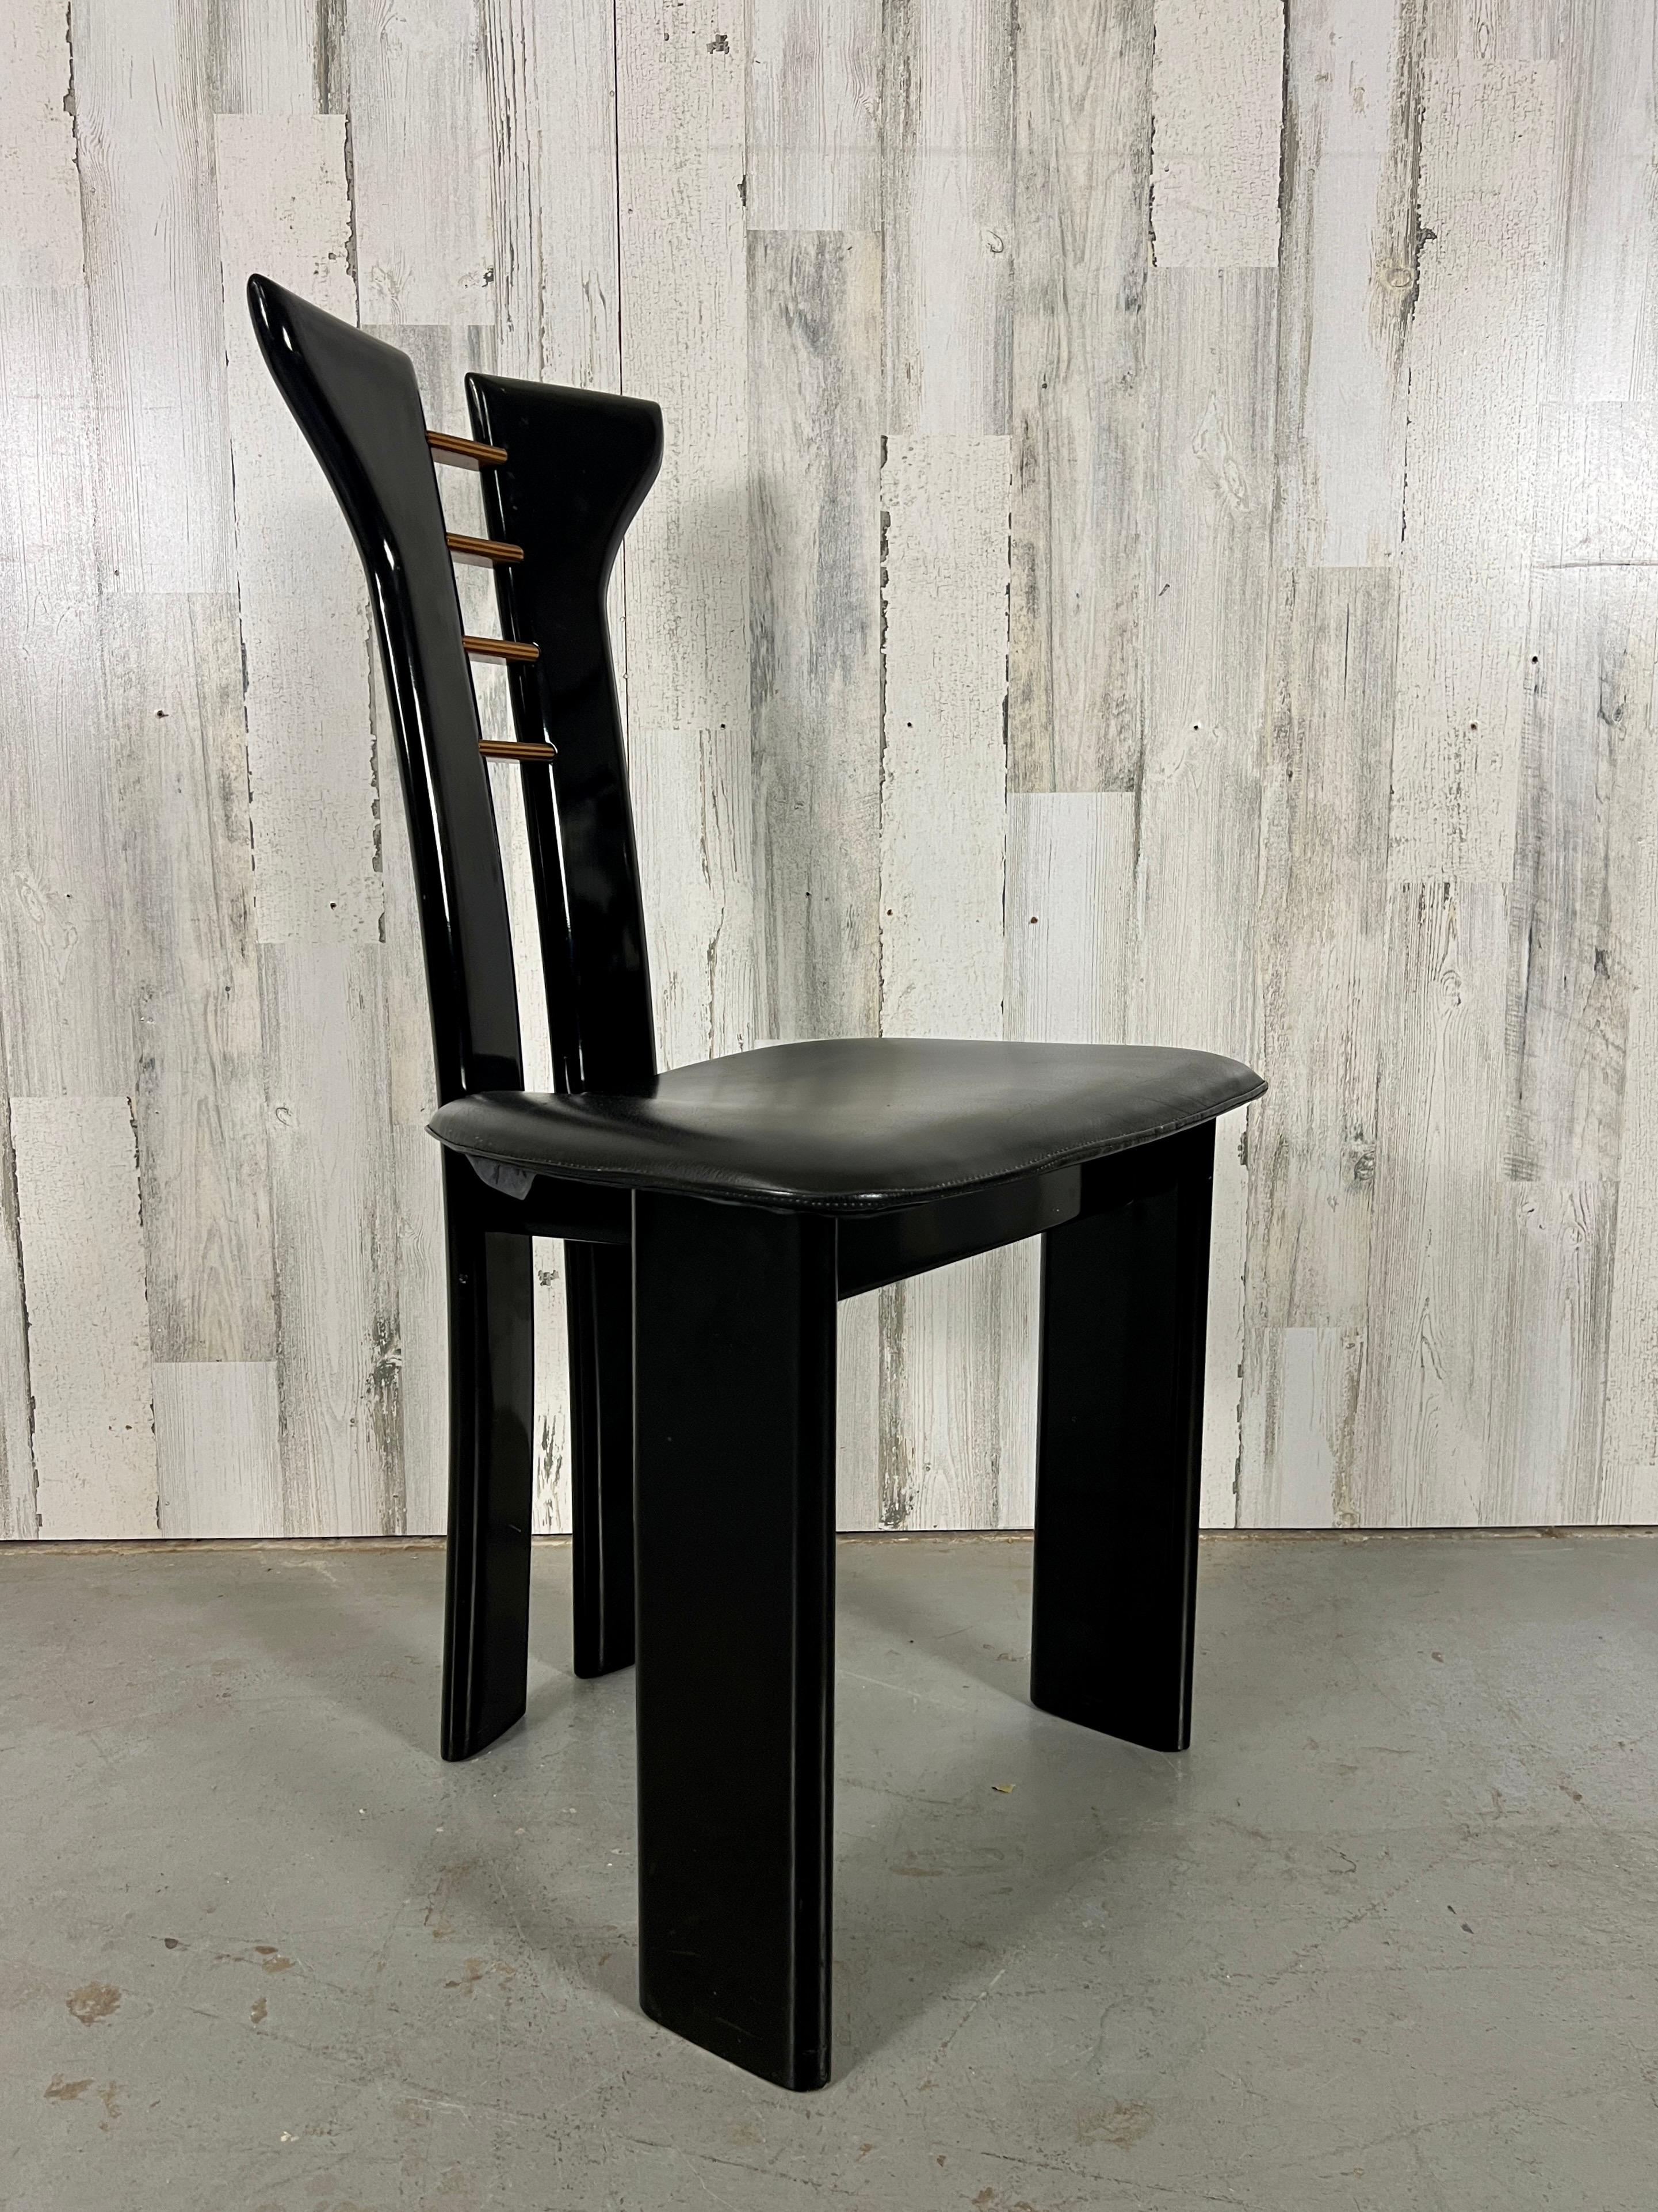 20th Century Pierre Cardin For Roche Bobois  Black Lacquer Dining Chairs